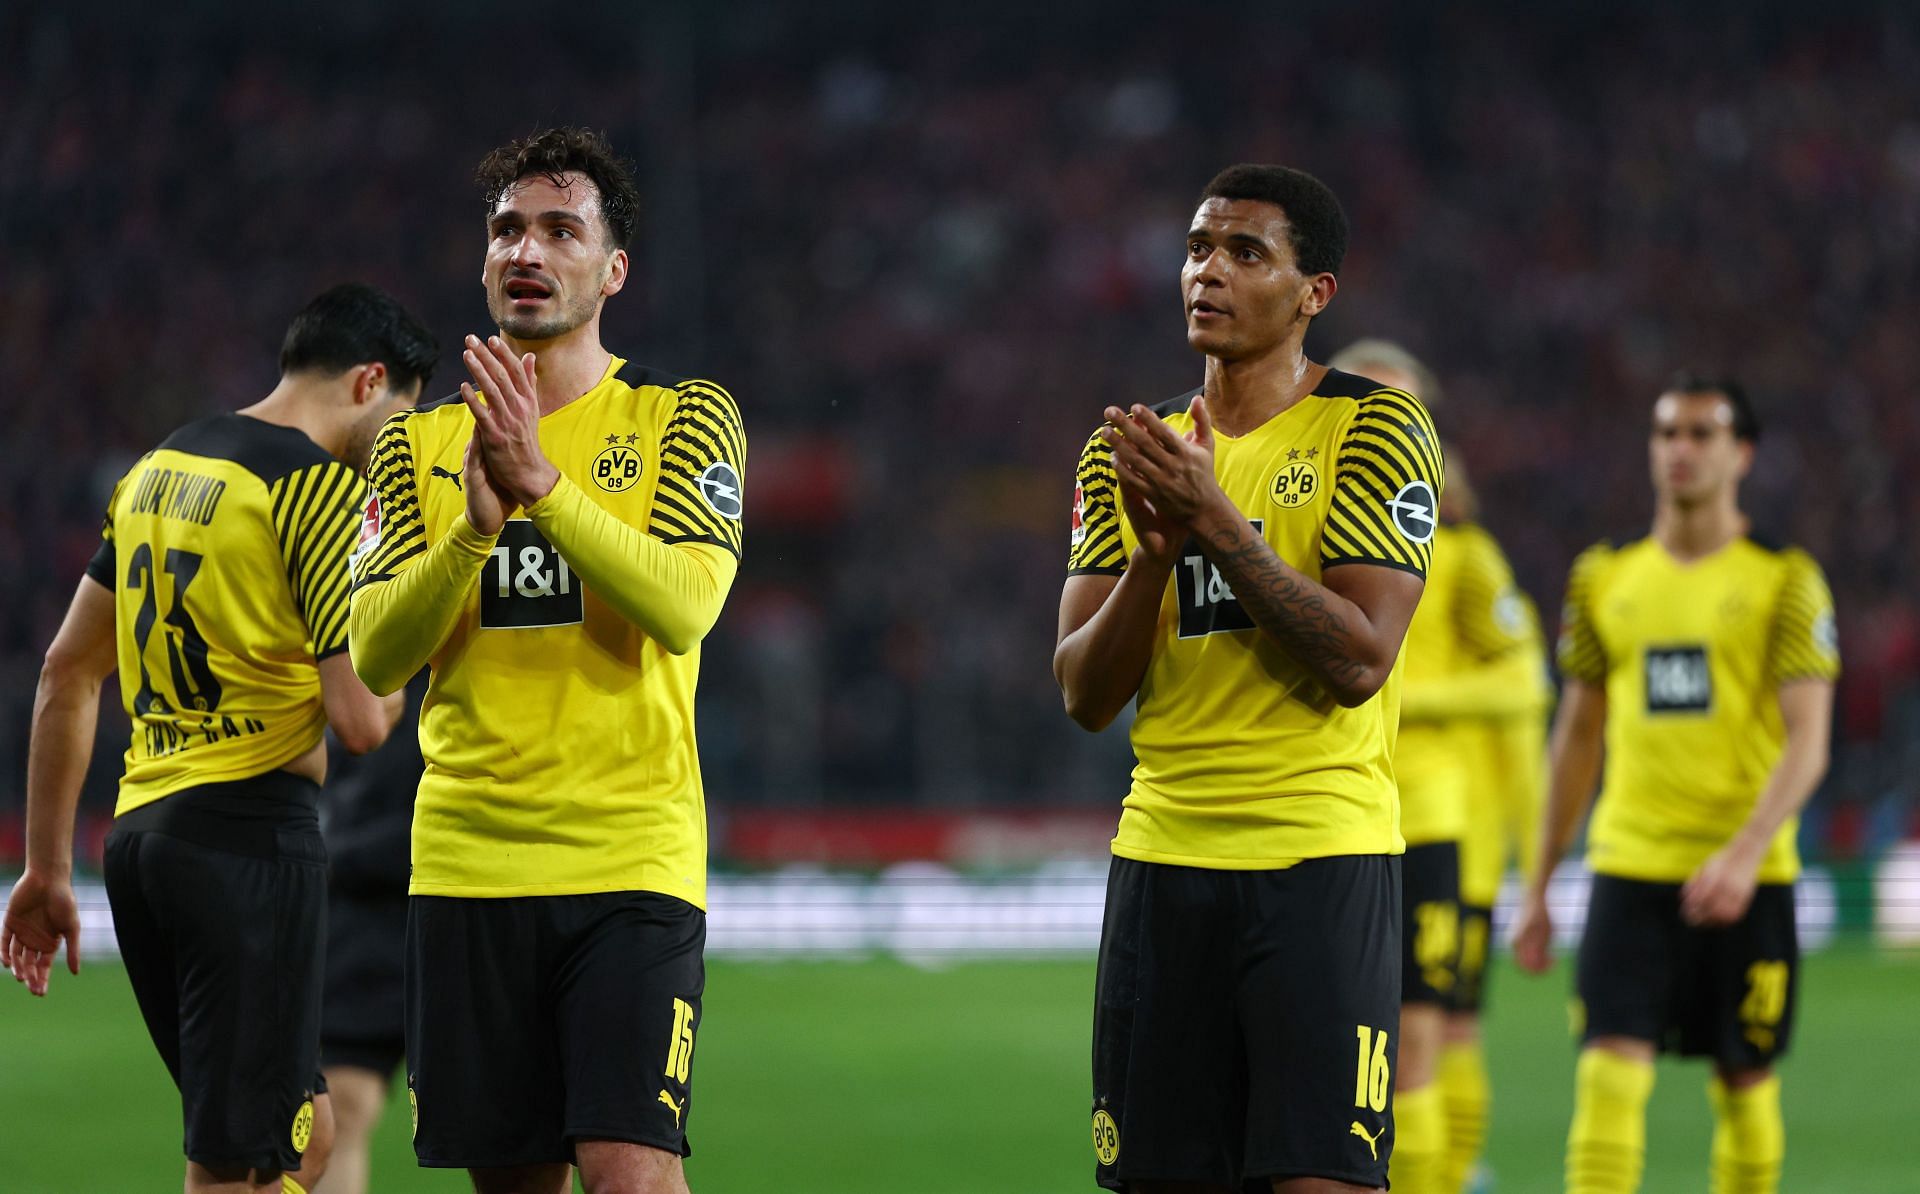 Manuel Akanji (right, #16) will lead Dortmund&#039;s defence in the absence of Mats Hummels (left).